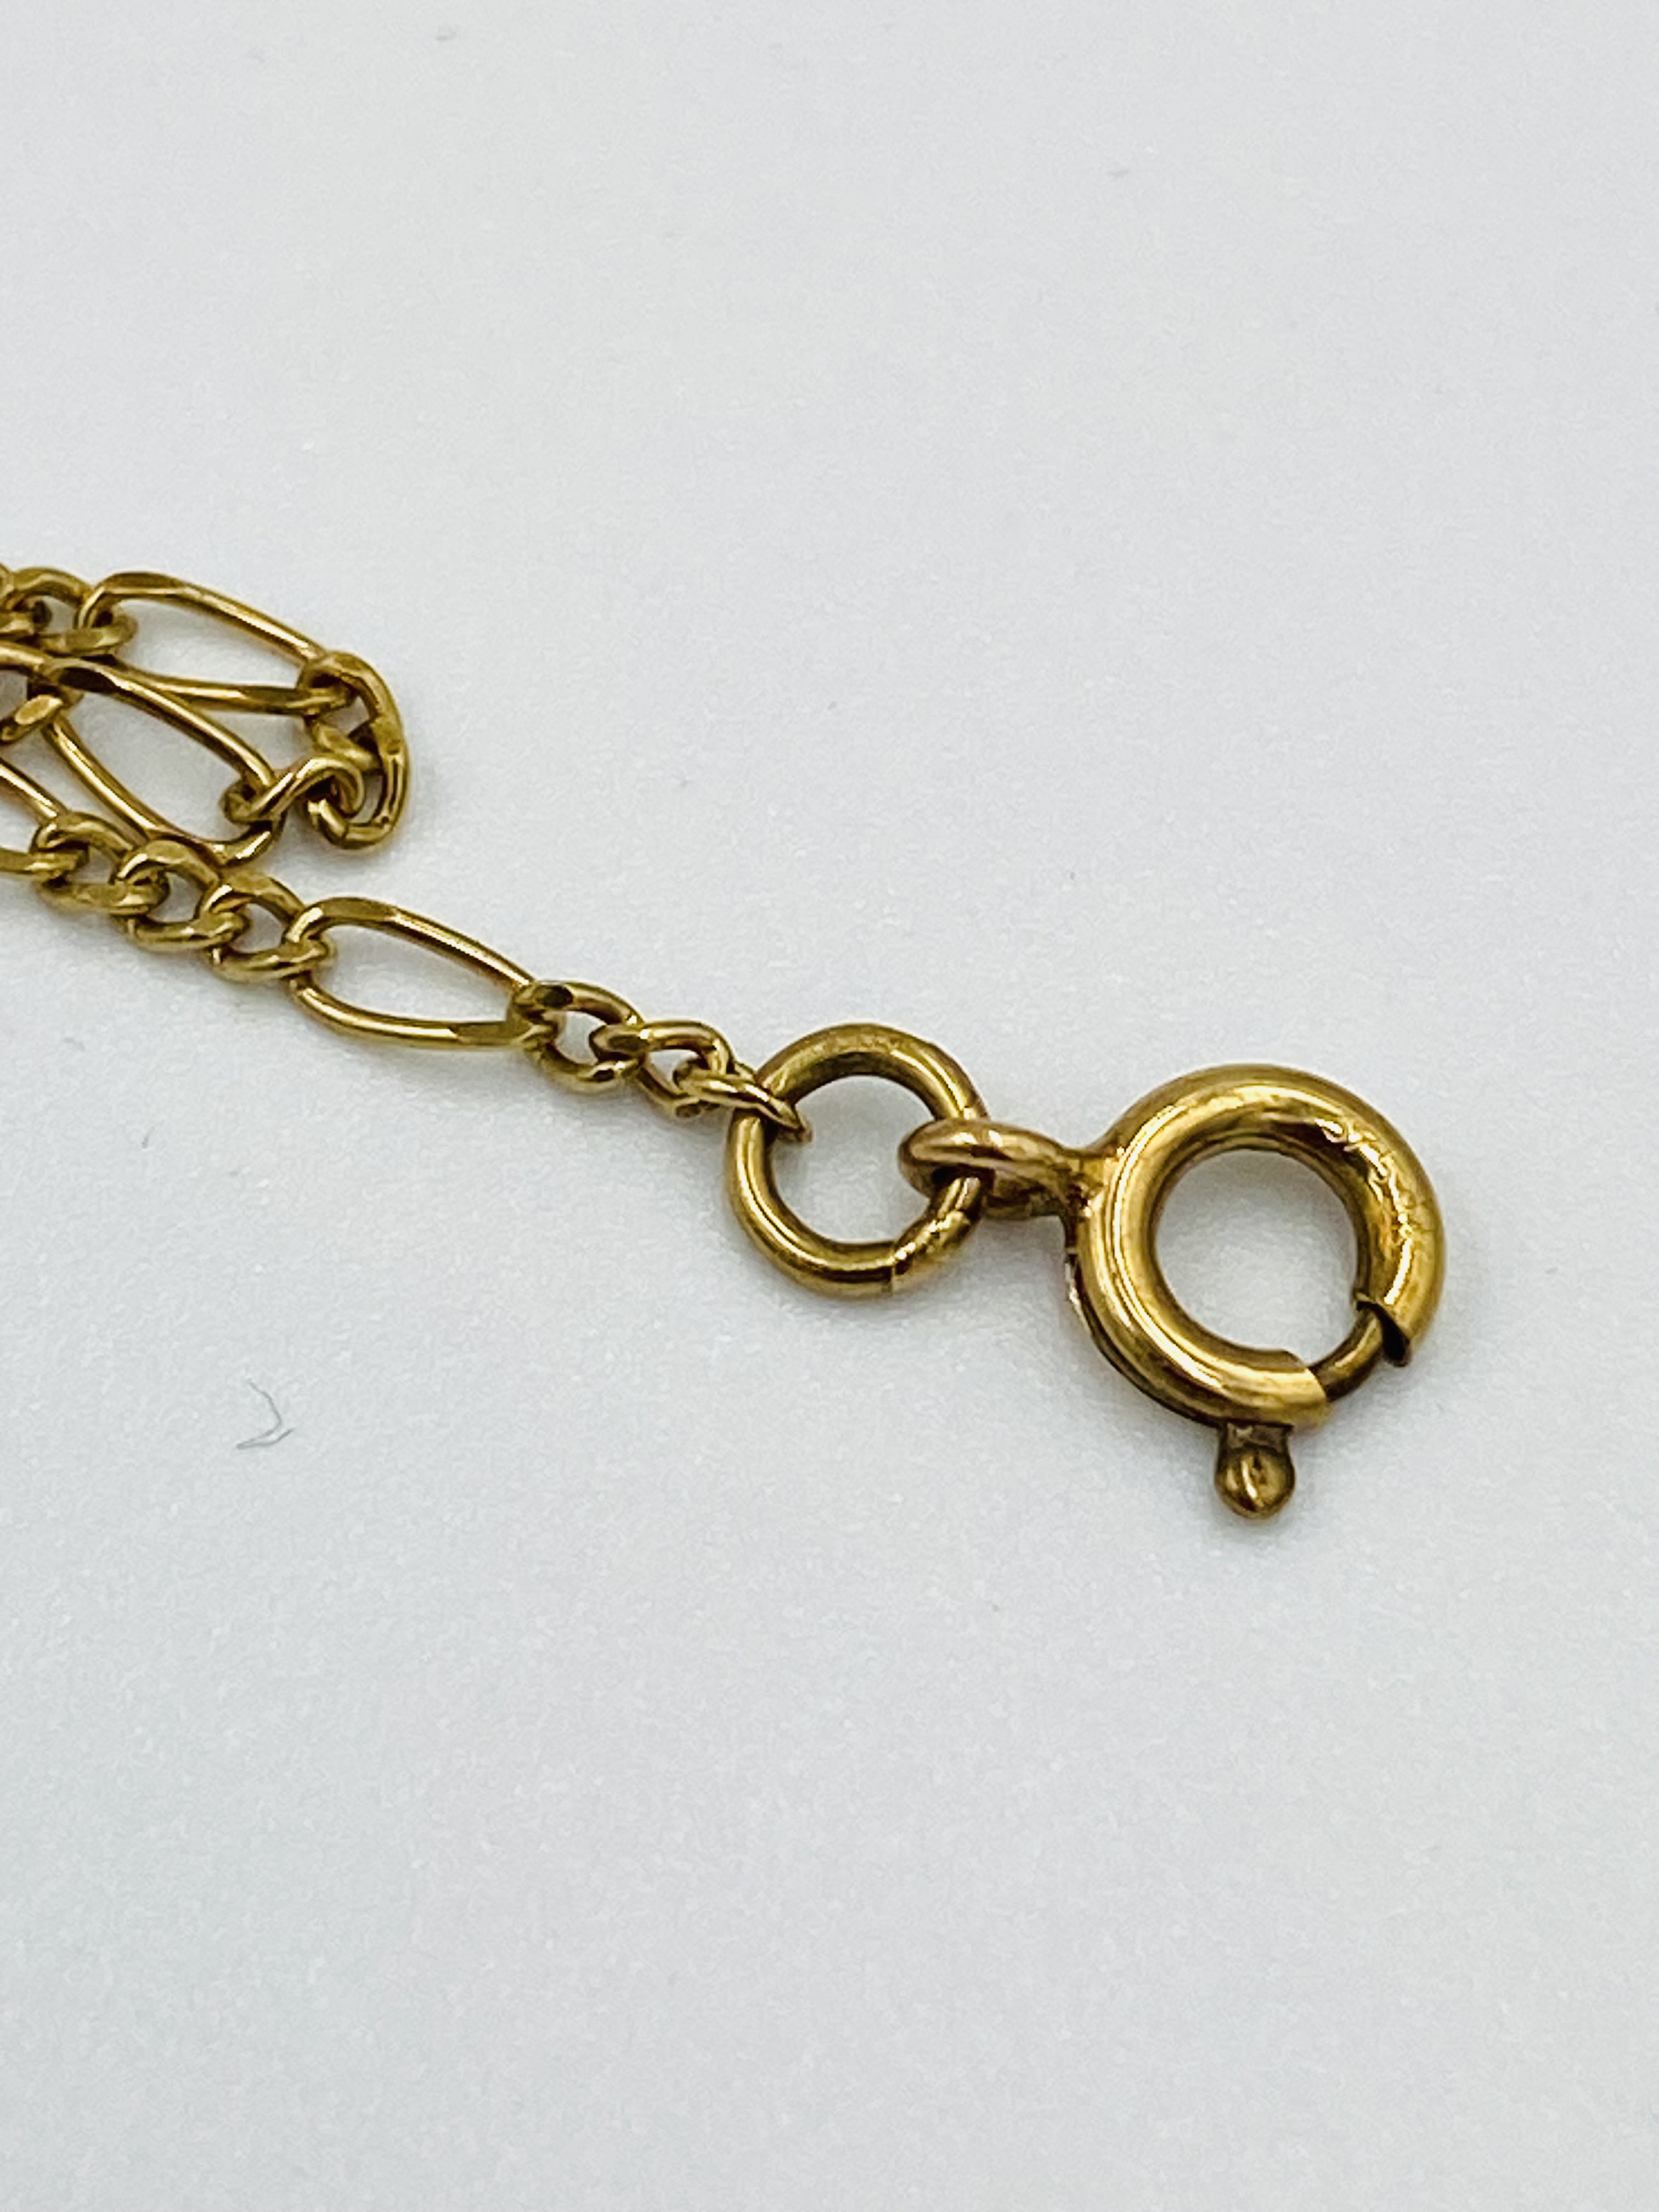 9ct gold link chain - Image 3 of 4